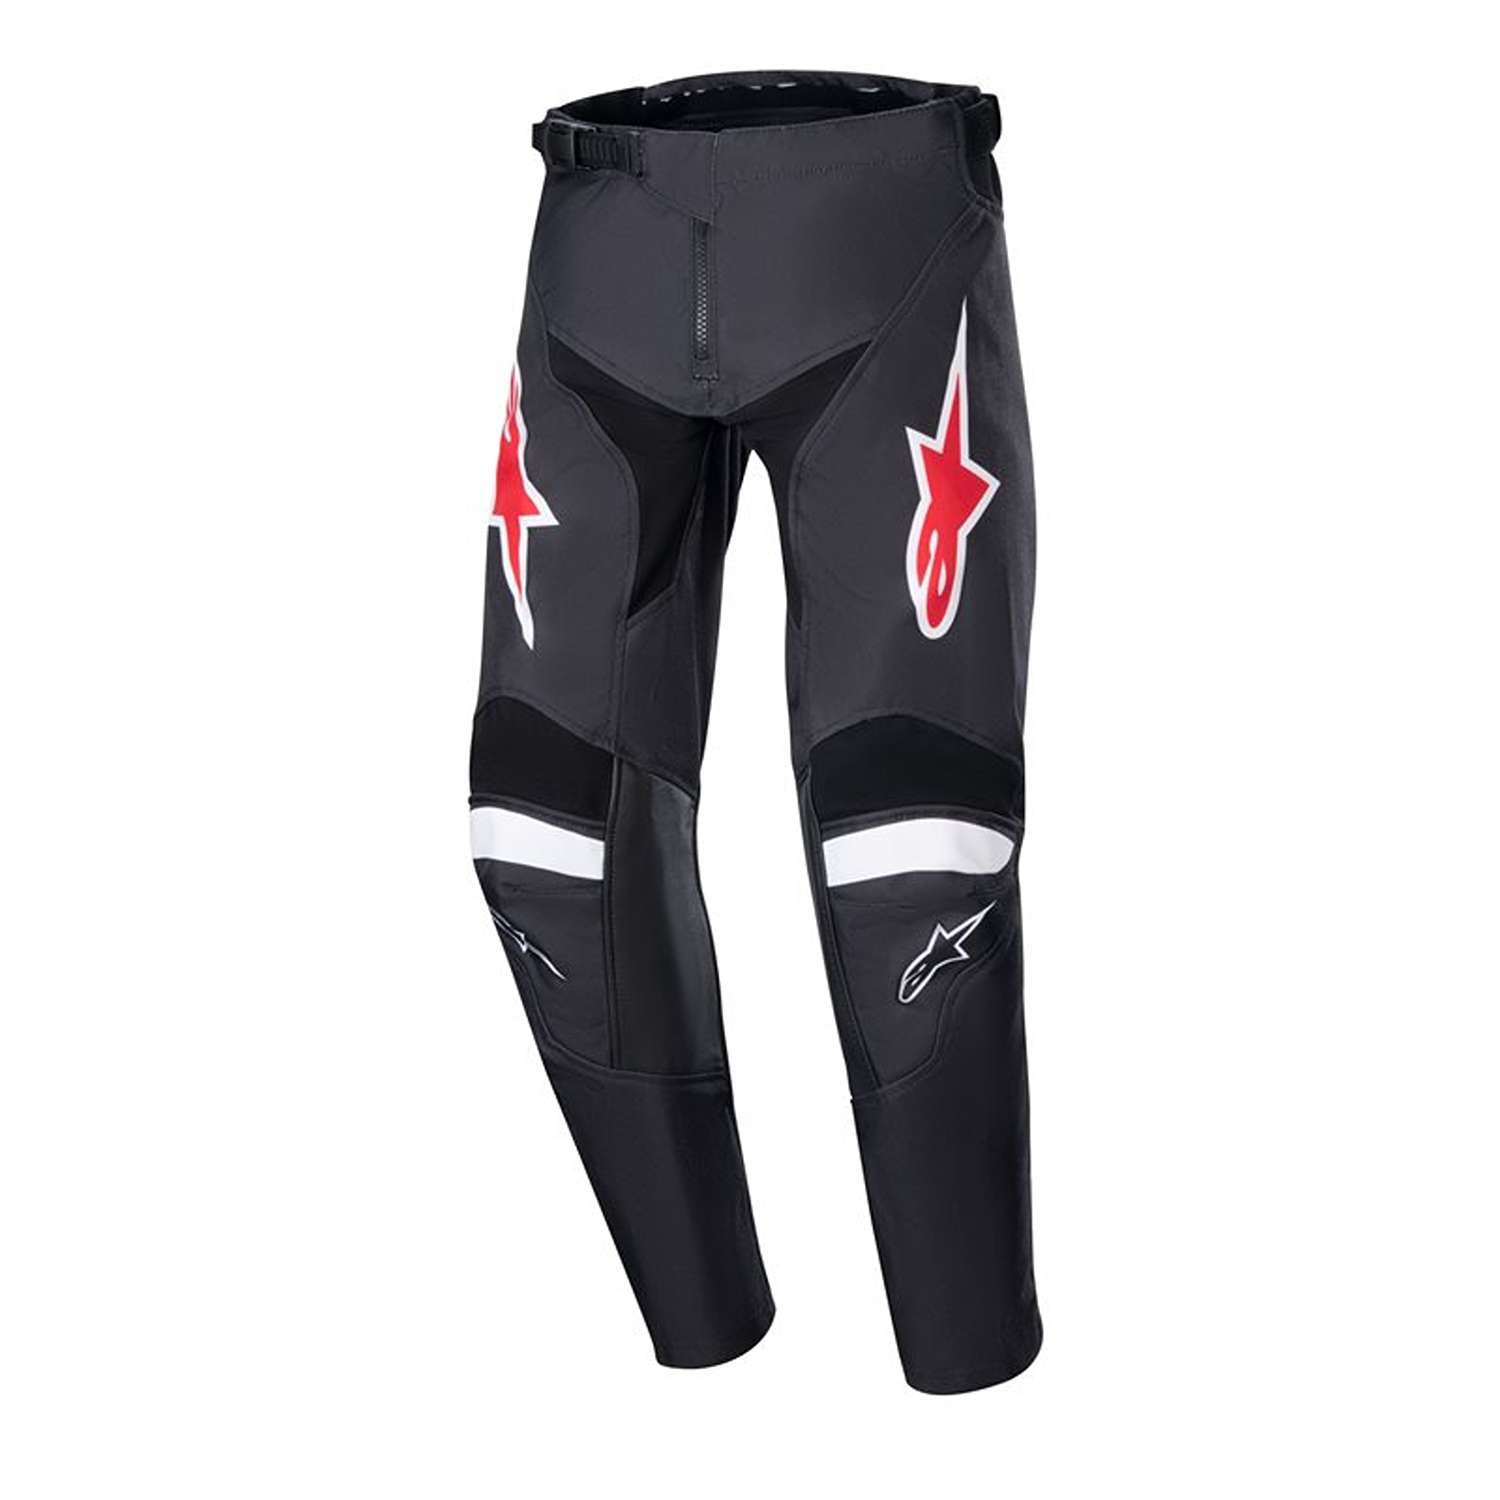 Image of Alpinestars Youth Racer Lucent Pants Black White Size 26 ID 8059347267449